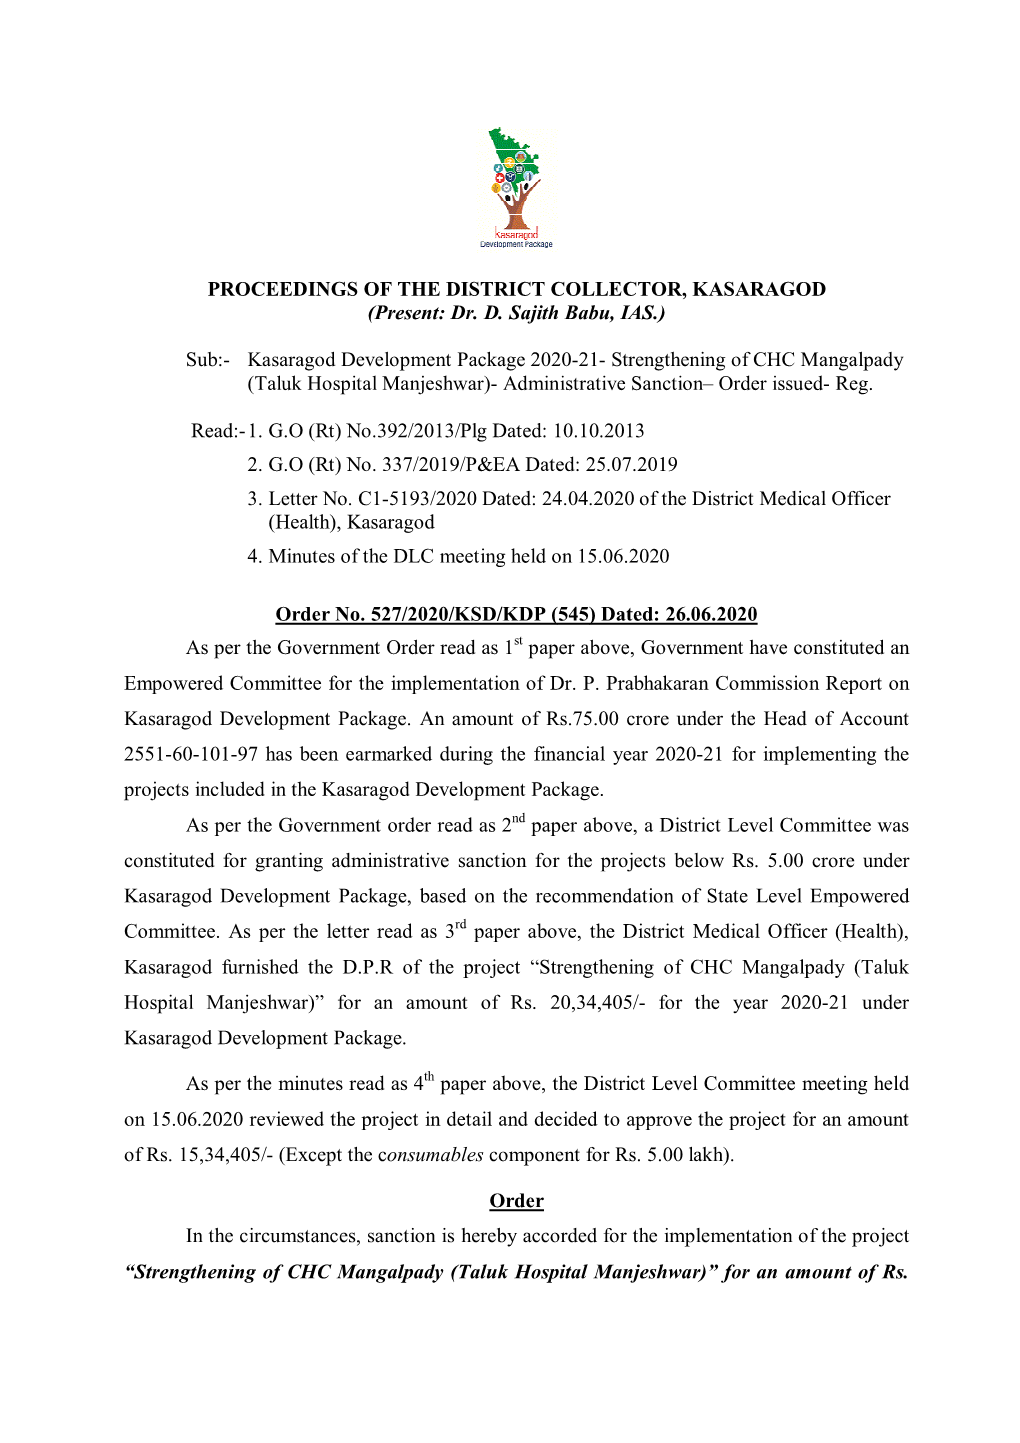 PROCEEDINGS of the DISTRICT COLLECTOR, KASARAGOD (Present: Dr